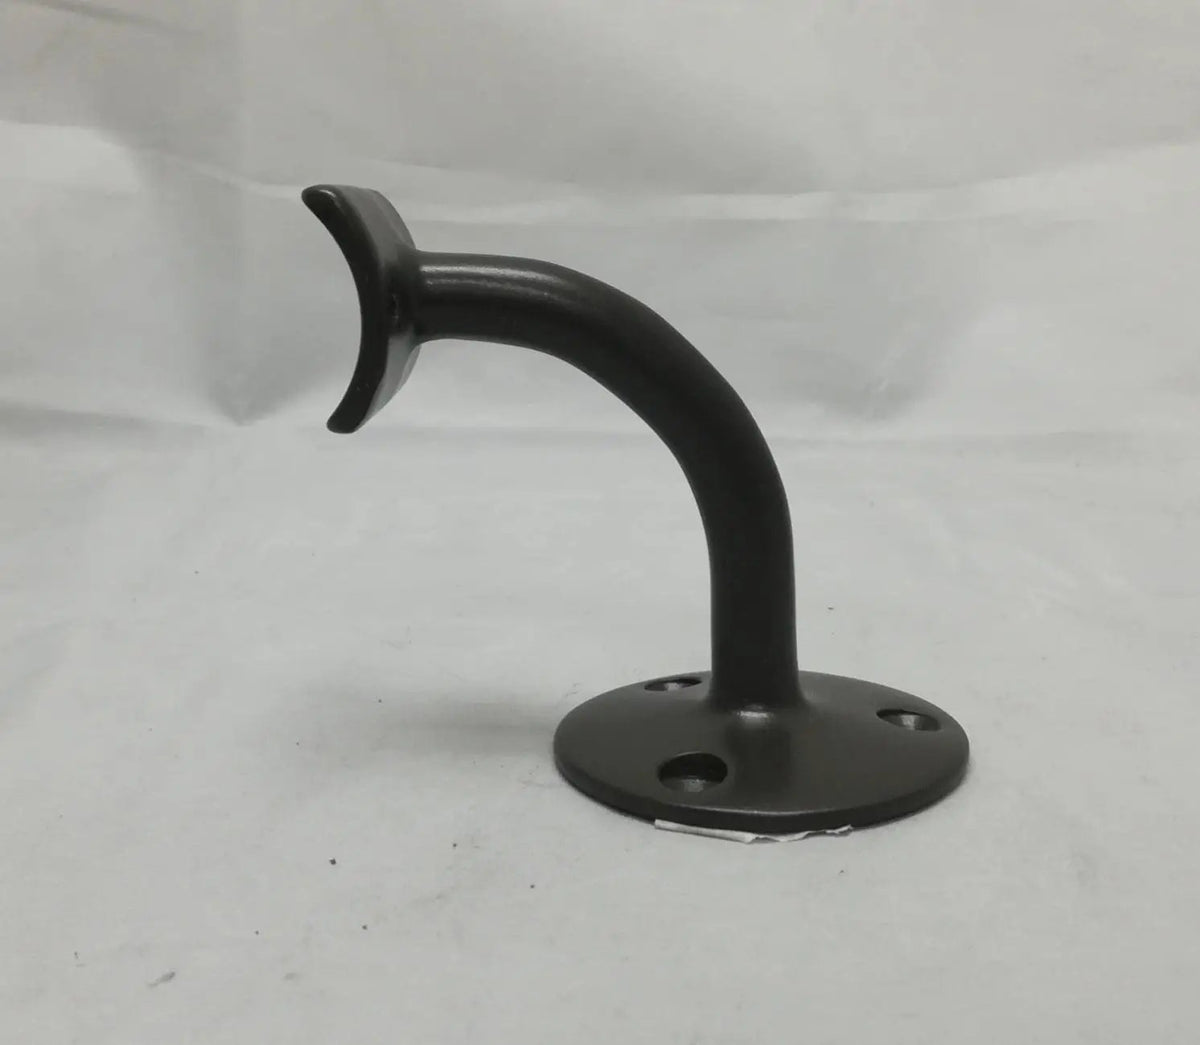 3-Screw Hand Rail Bracket for 1-1/2" Tubing Brackets, Components for 1-1/2" Od Tubing OilRubbedBronzeFinish-Specialfinishpleasecall Trade Diversified